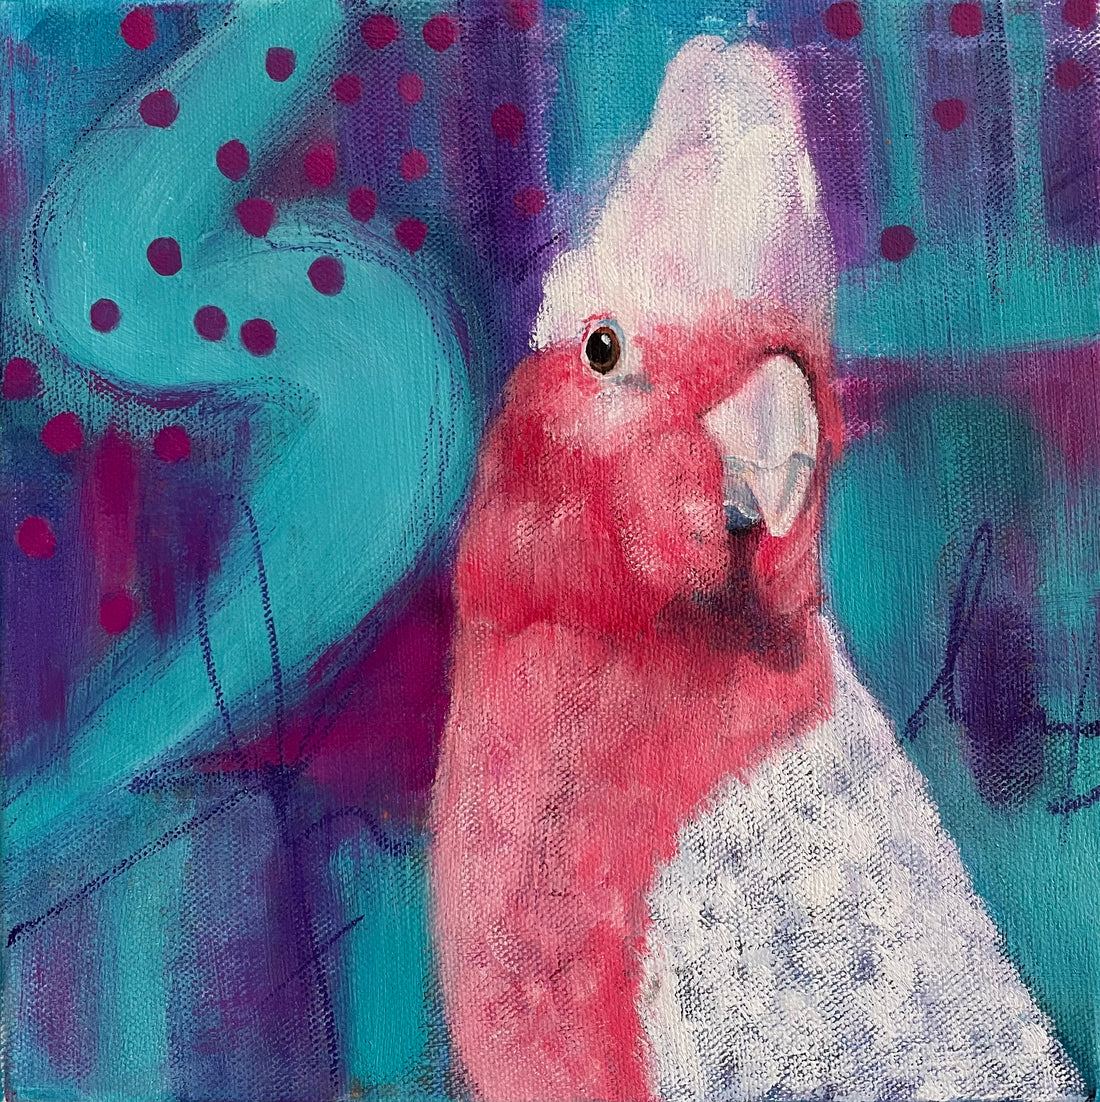 Colourful Mixed Media painting of galah with an abstract background.